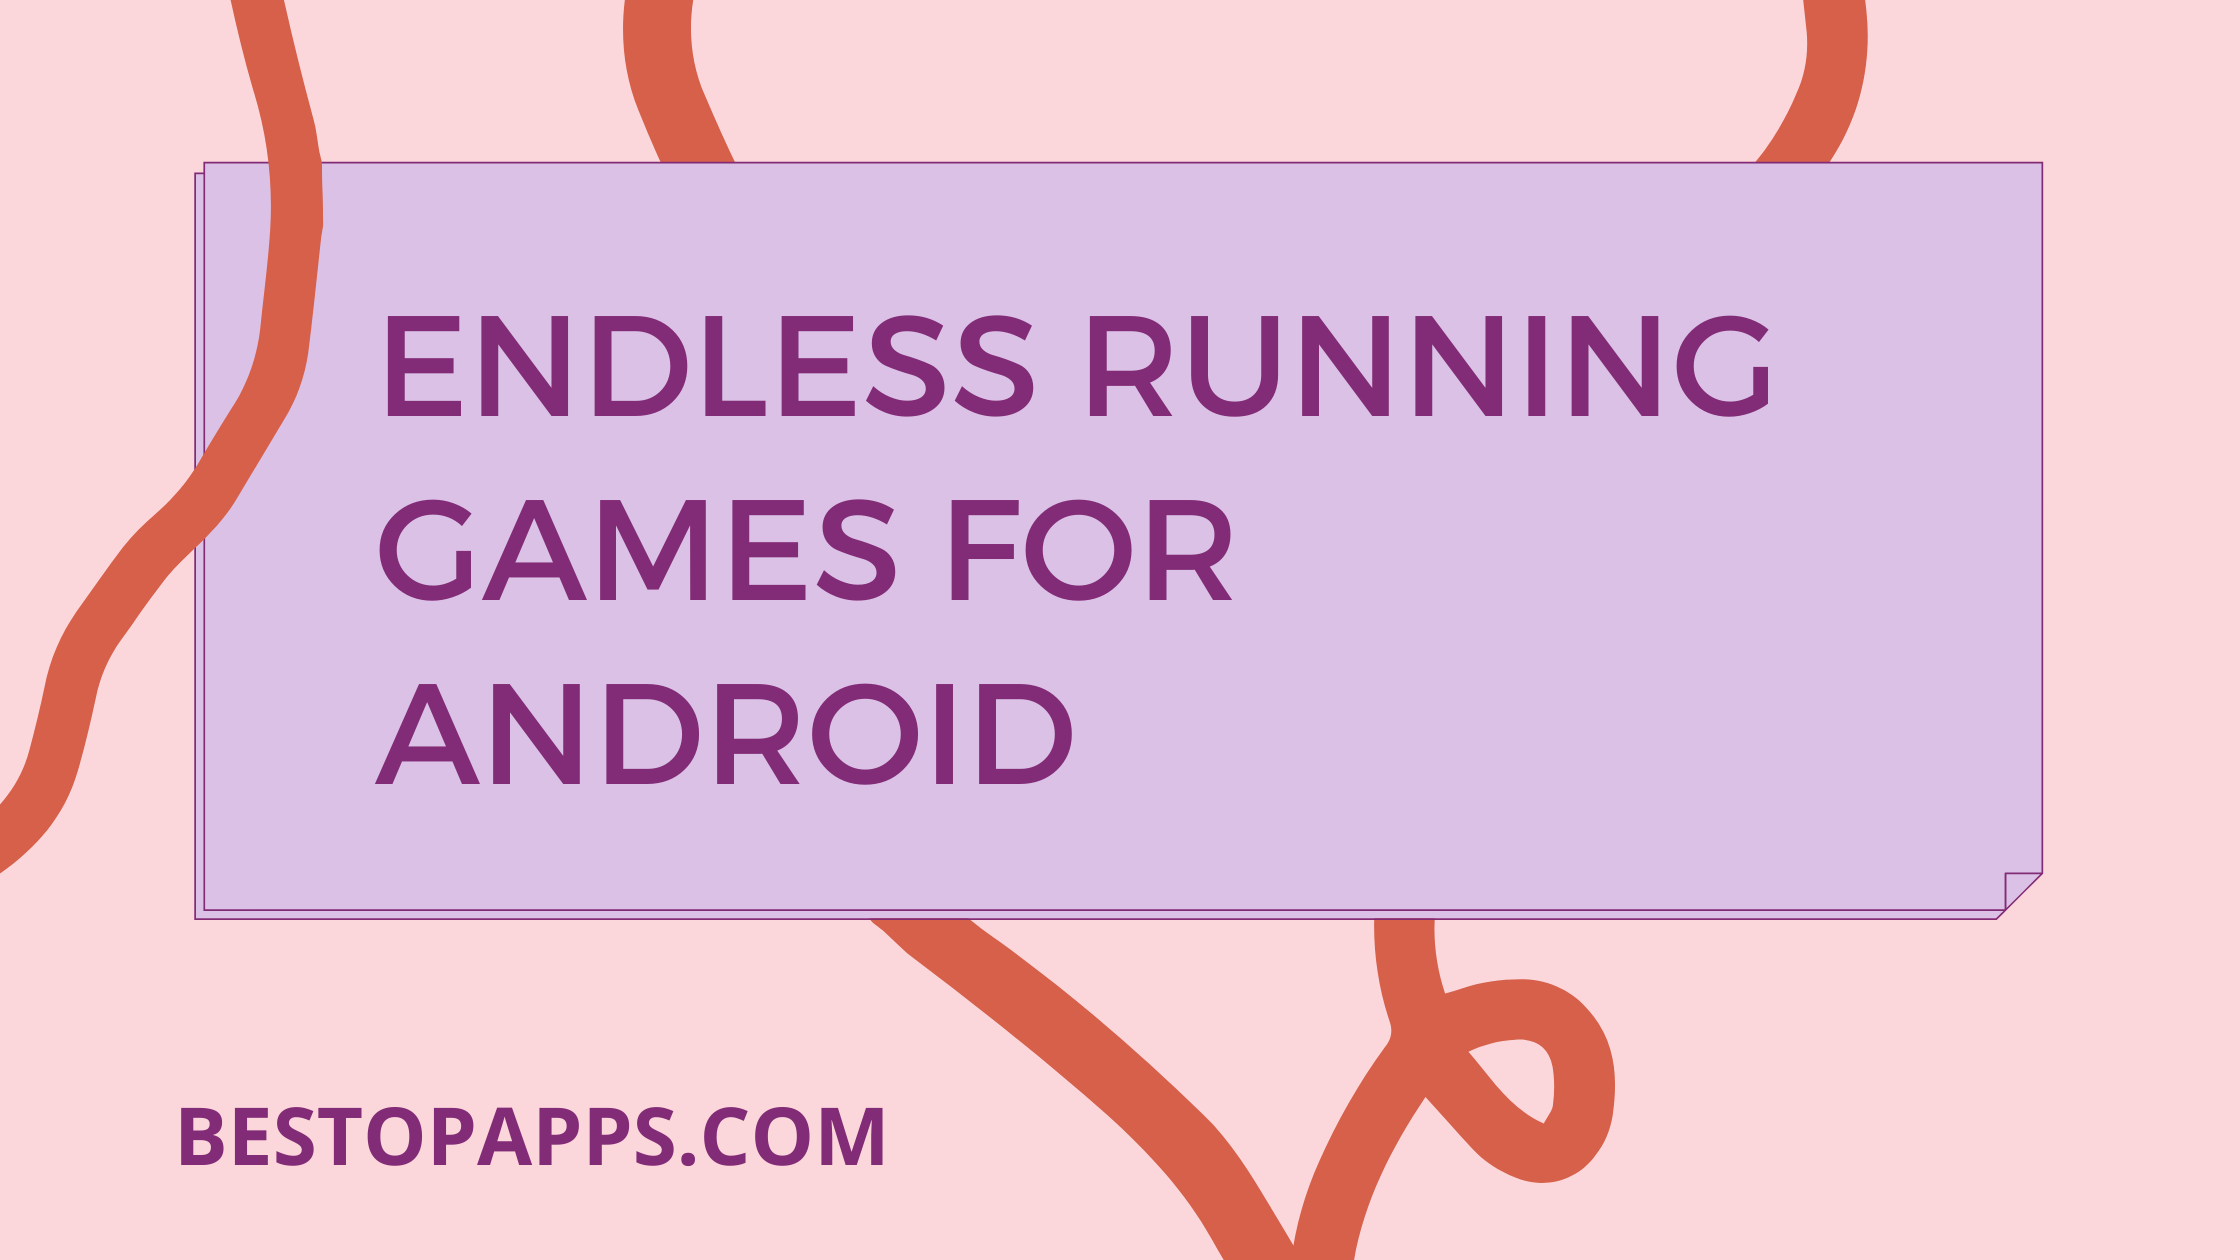 Endless running games for android